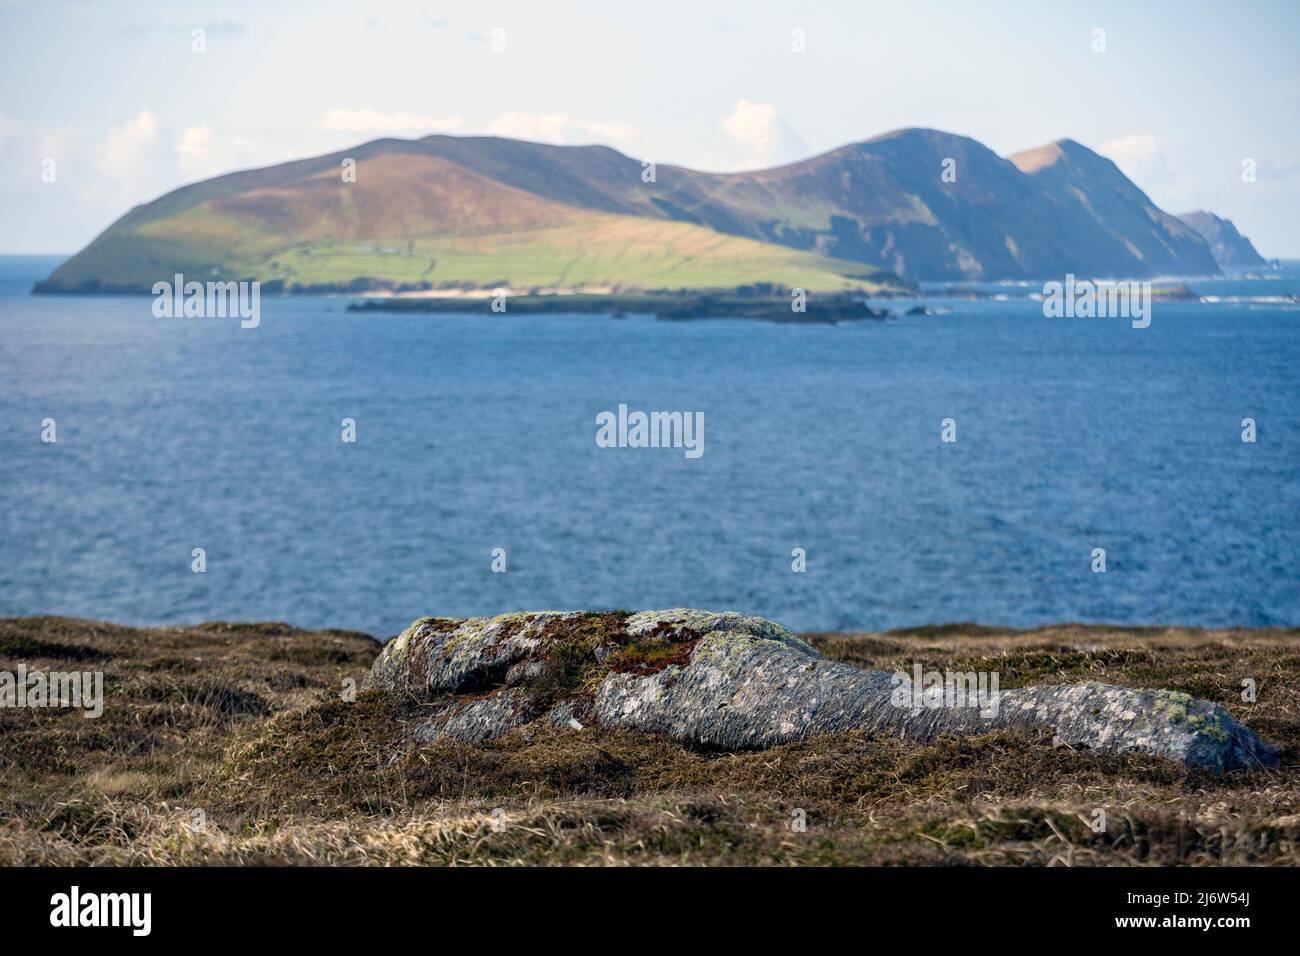 Beautiful landscape in the West Kerry Gaeltacht showing the Great Blasket Island in the distance Stock Photo